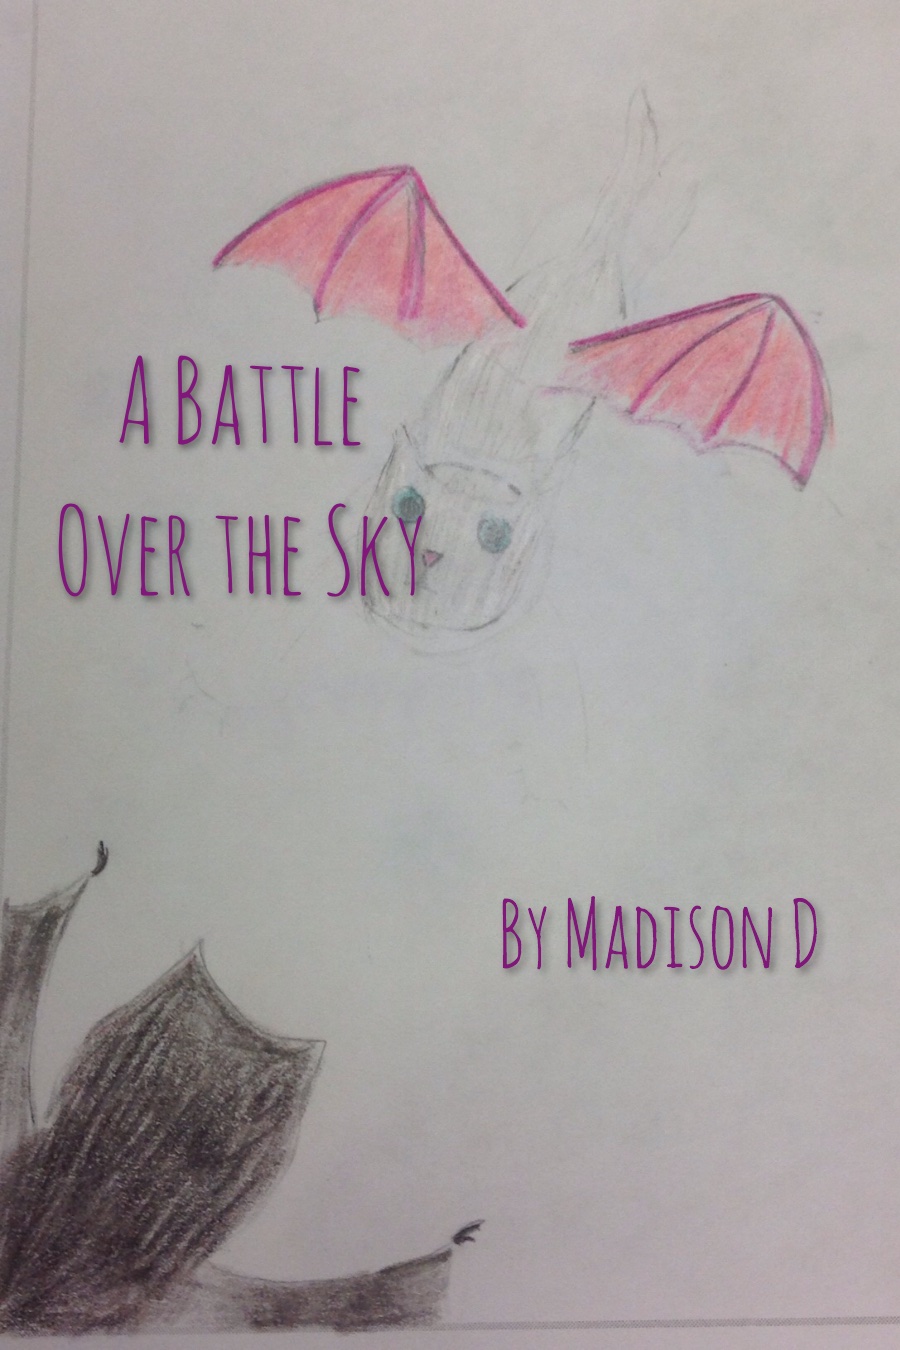 A Battle Over the Sky by Madison D